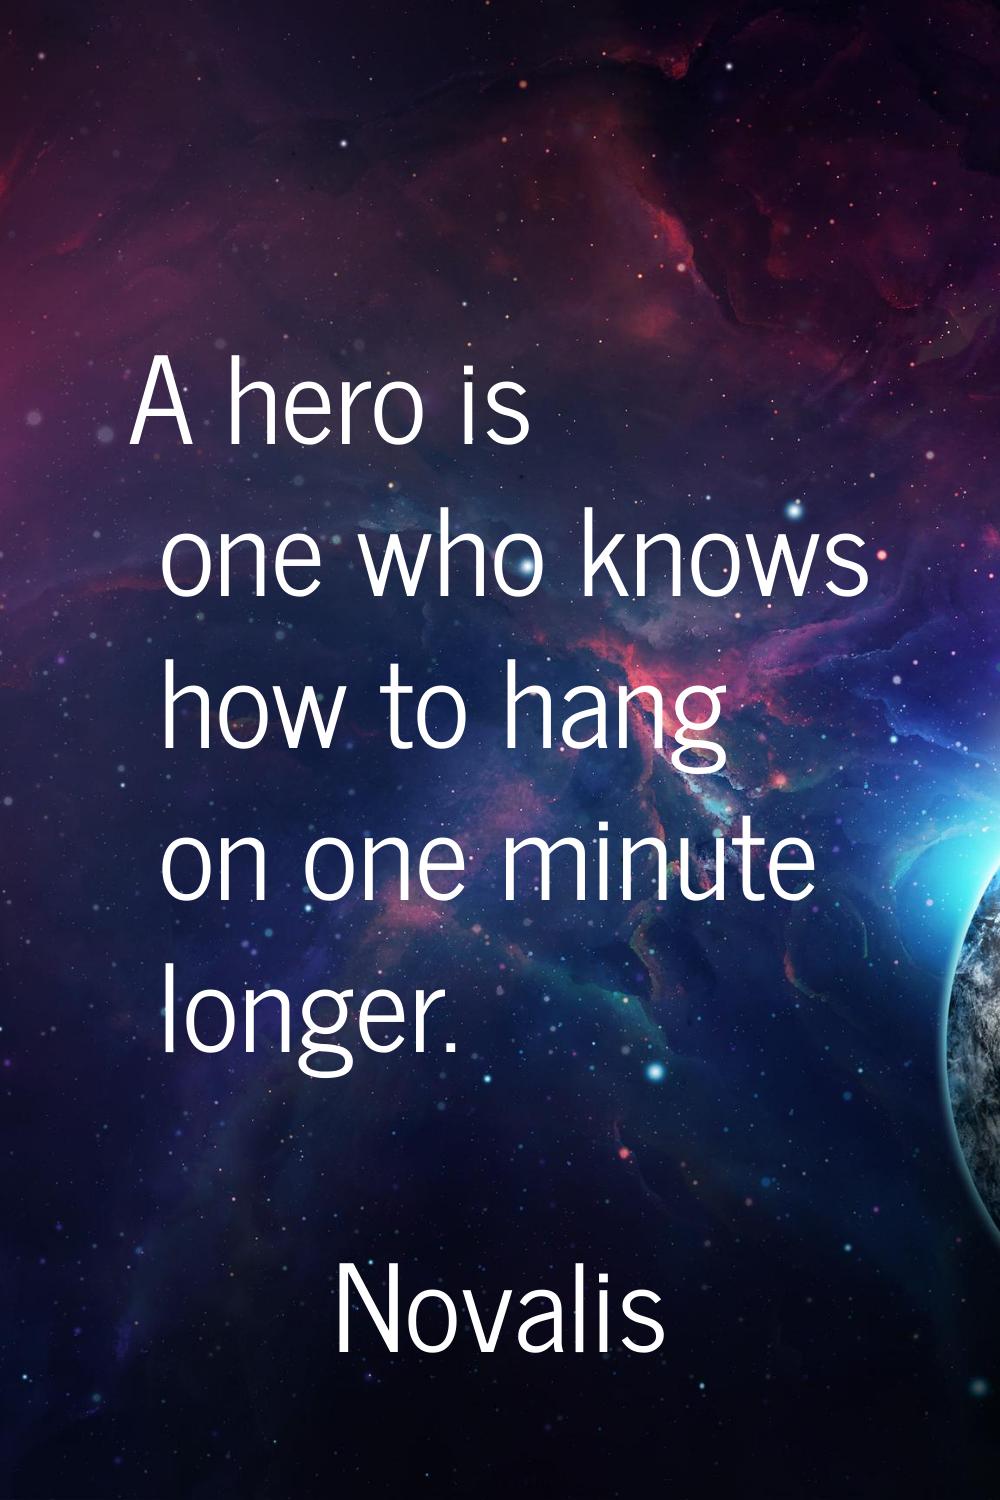 A hero is one who knows how to hang on one minute longer.